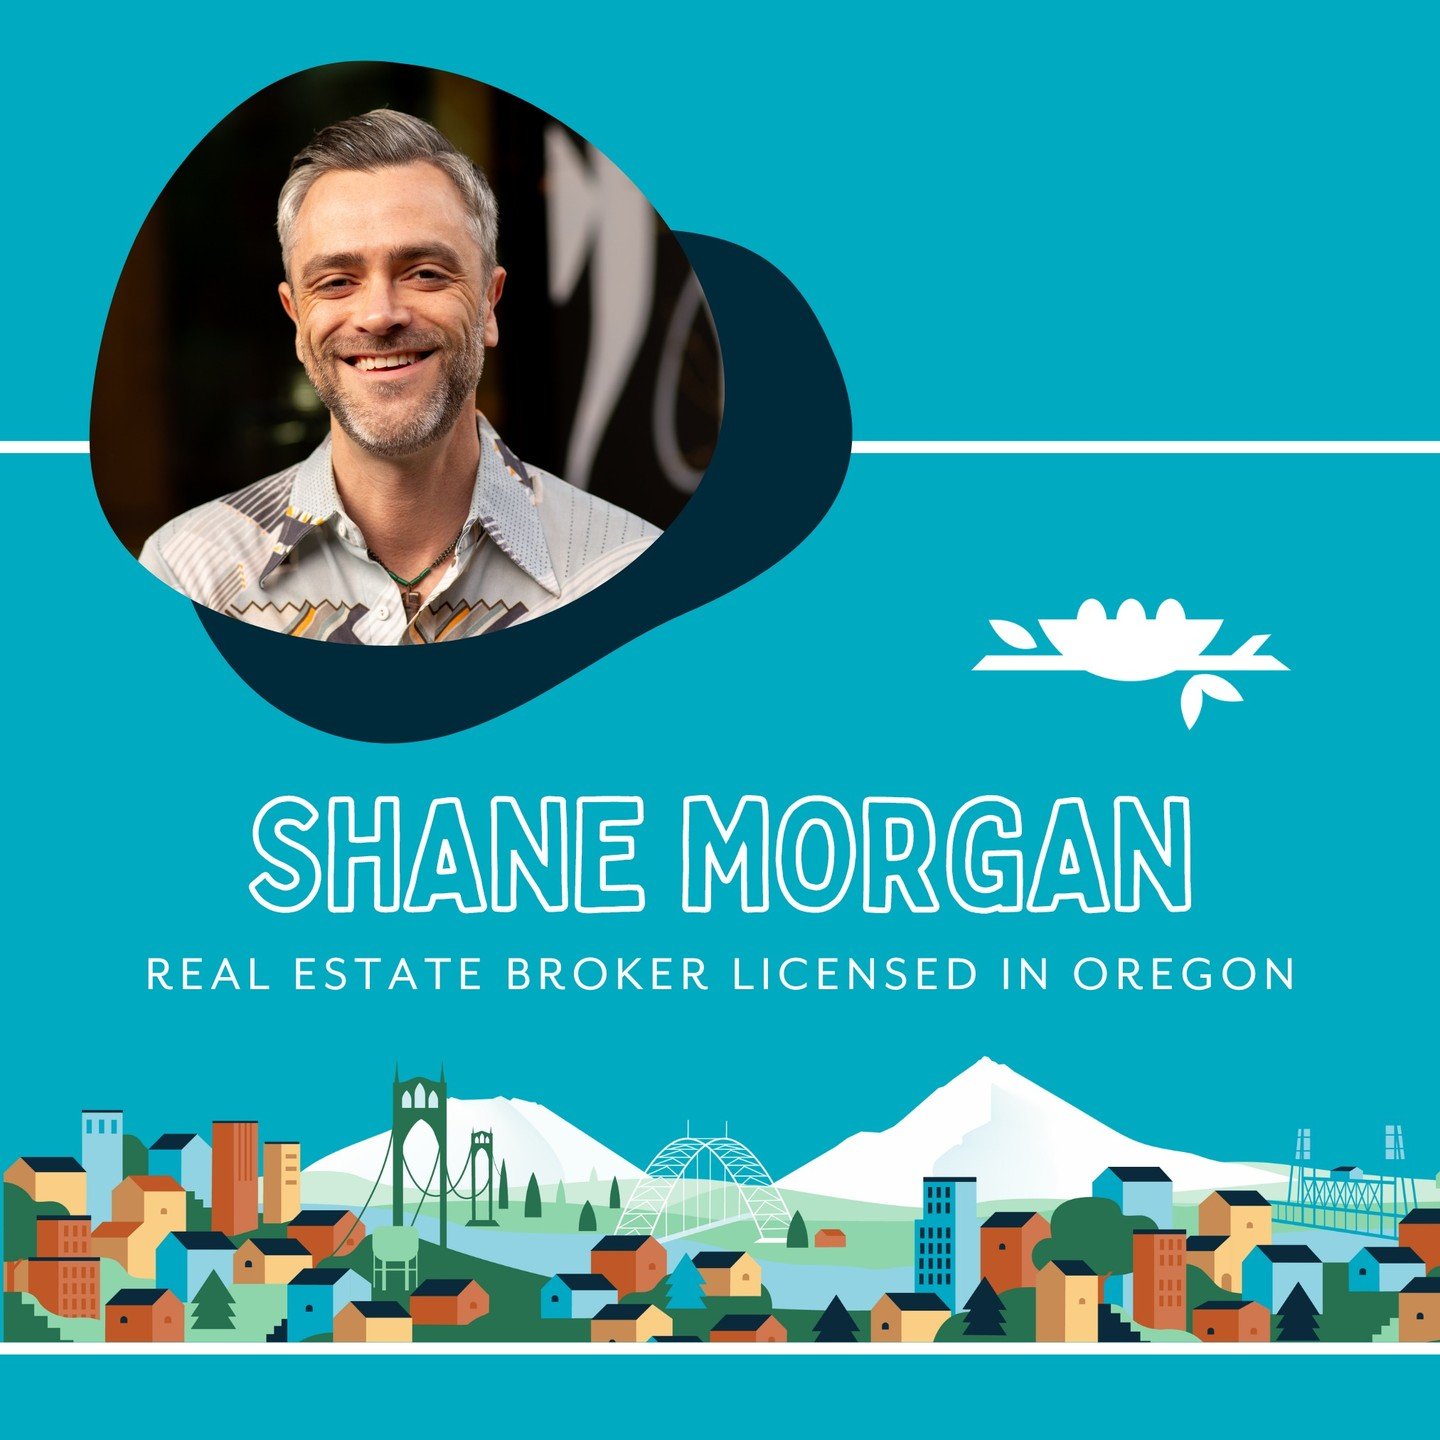 We are thrilled to announce Shane Morgan has joined The Nest.

📌 THE FACTS 📌

&bull; Born and Raised Portlander, dedicated city biker. 

&bull; Inspired to begin his career by his Realtor Grandmother. 

&bull; Lives in an old craftsman home the Hol